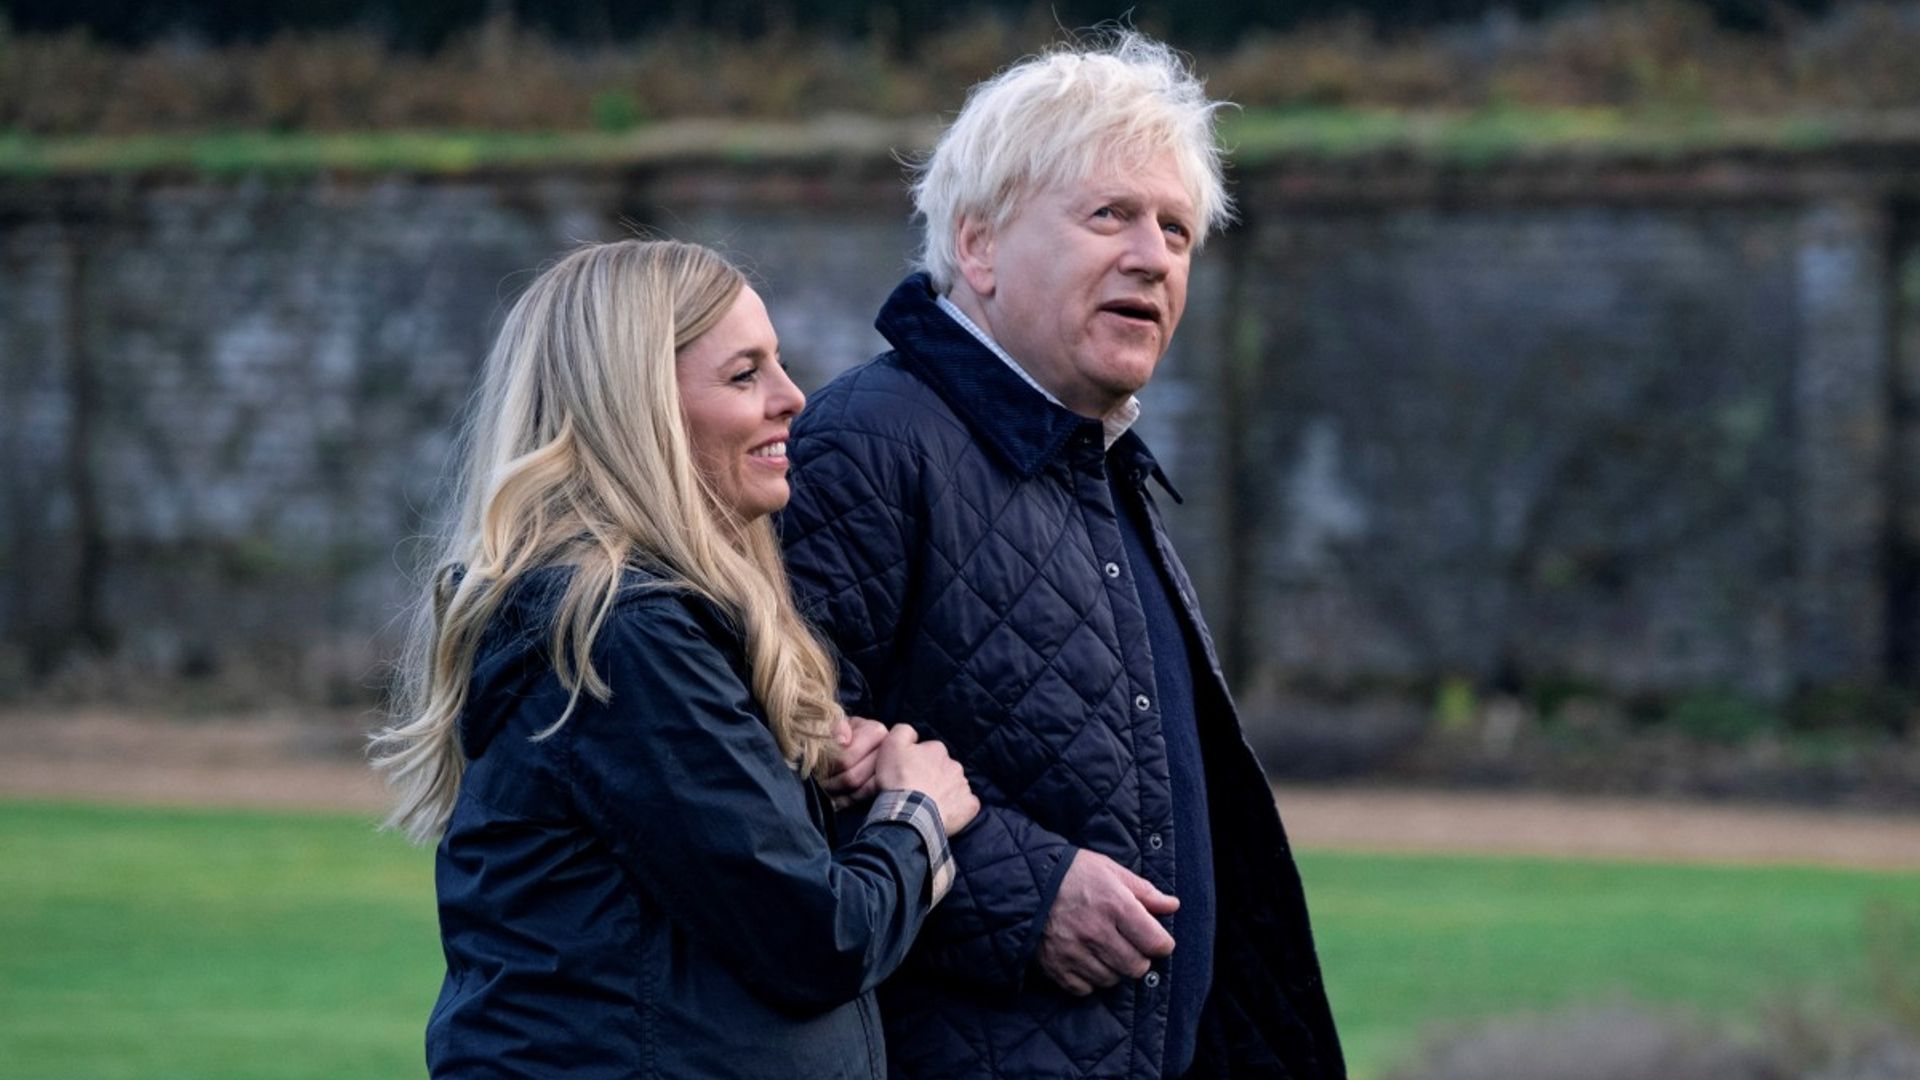 Kenneth Branagh is Boris Johnson in This England trailer – and the resemblance is uncanny